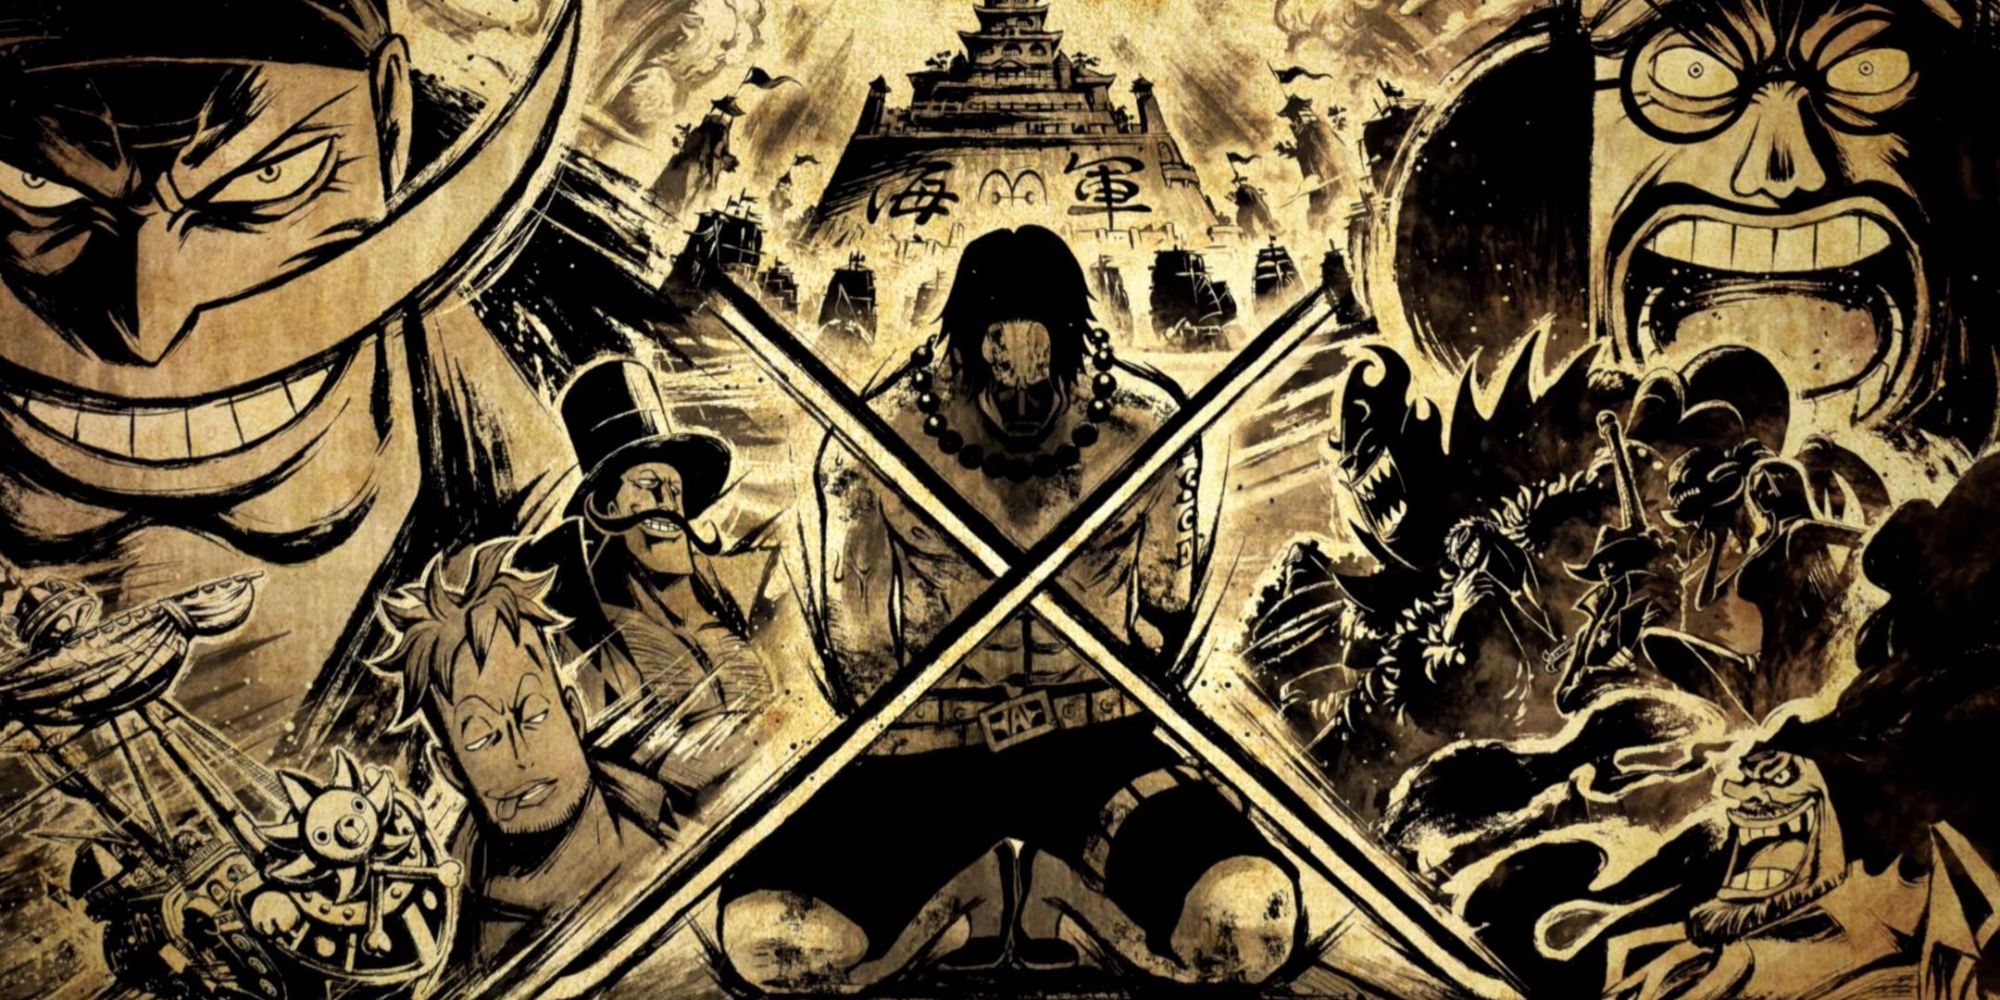 The image summarizes the One Piece Marineford arc with two sides pictures on opposite sides of each other, with Luffy's brother Ace sitting in the middle with two large swords crossing in front of him.